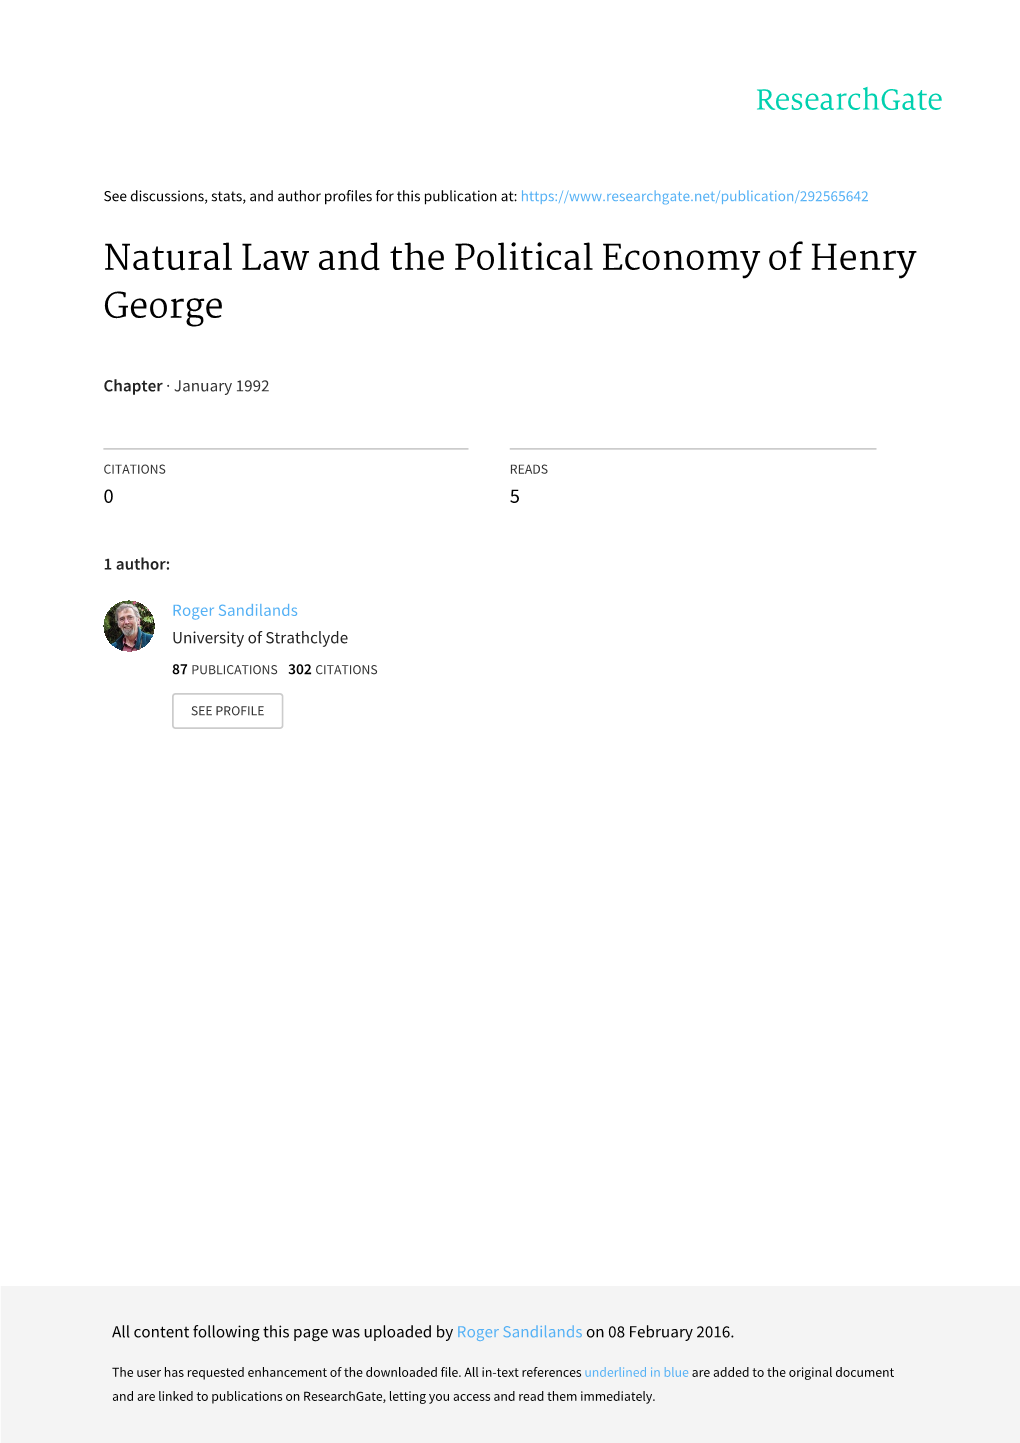 Natural Law and the Political Economy of Henry George